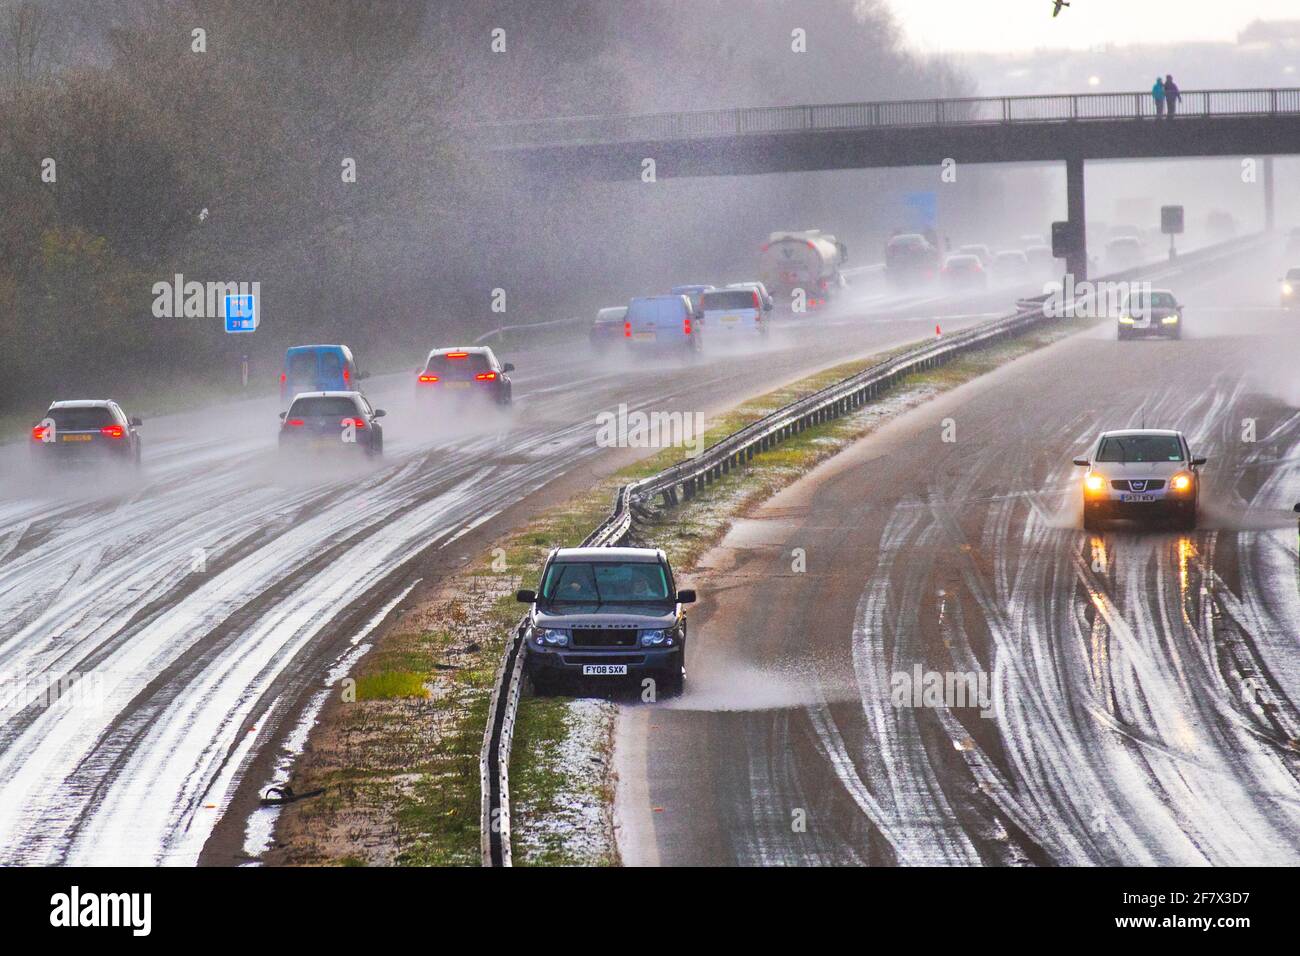 Motorway fast lane accident after driving in the middle of a hailstorm in hazardous driving conditions in Chorley Lancashire. April 2021 UK Weather;  Motorway mayhem as freak hail stone shower makes driving tricky with a series of collisions in Chorley. Car crashes into central reservation, 4 wheel drive vehicles in separate incidents collide with the armcor on the M61 central reservation. Stock Photo